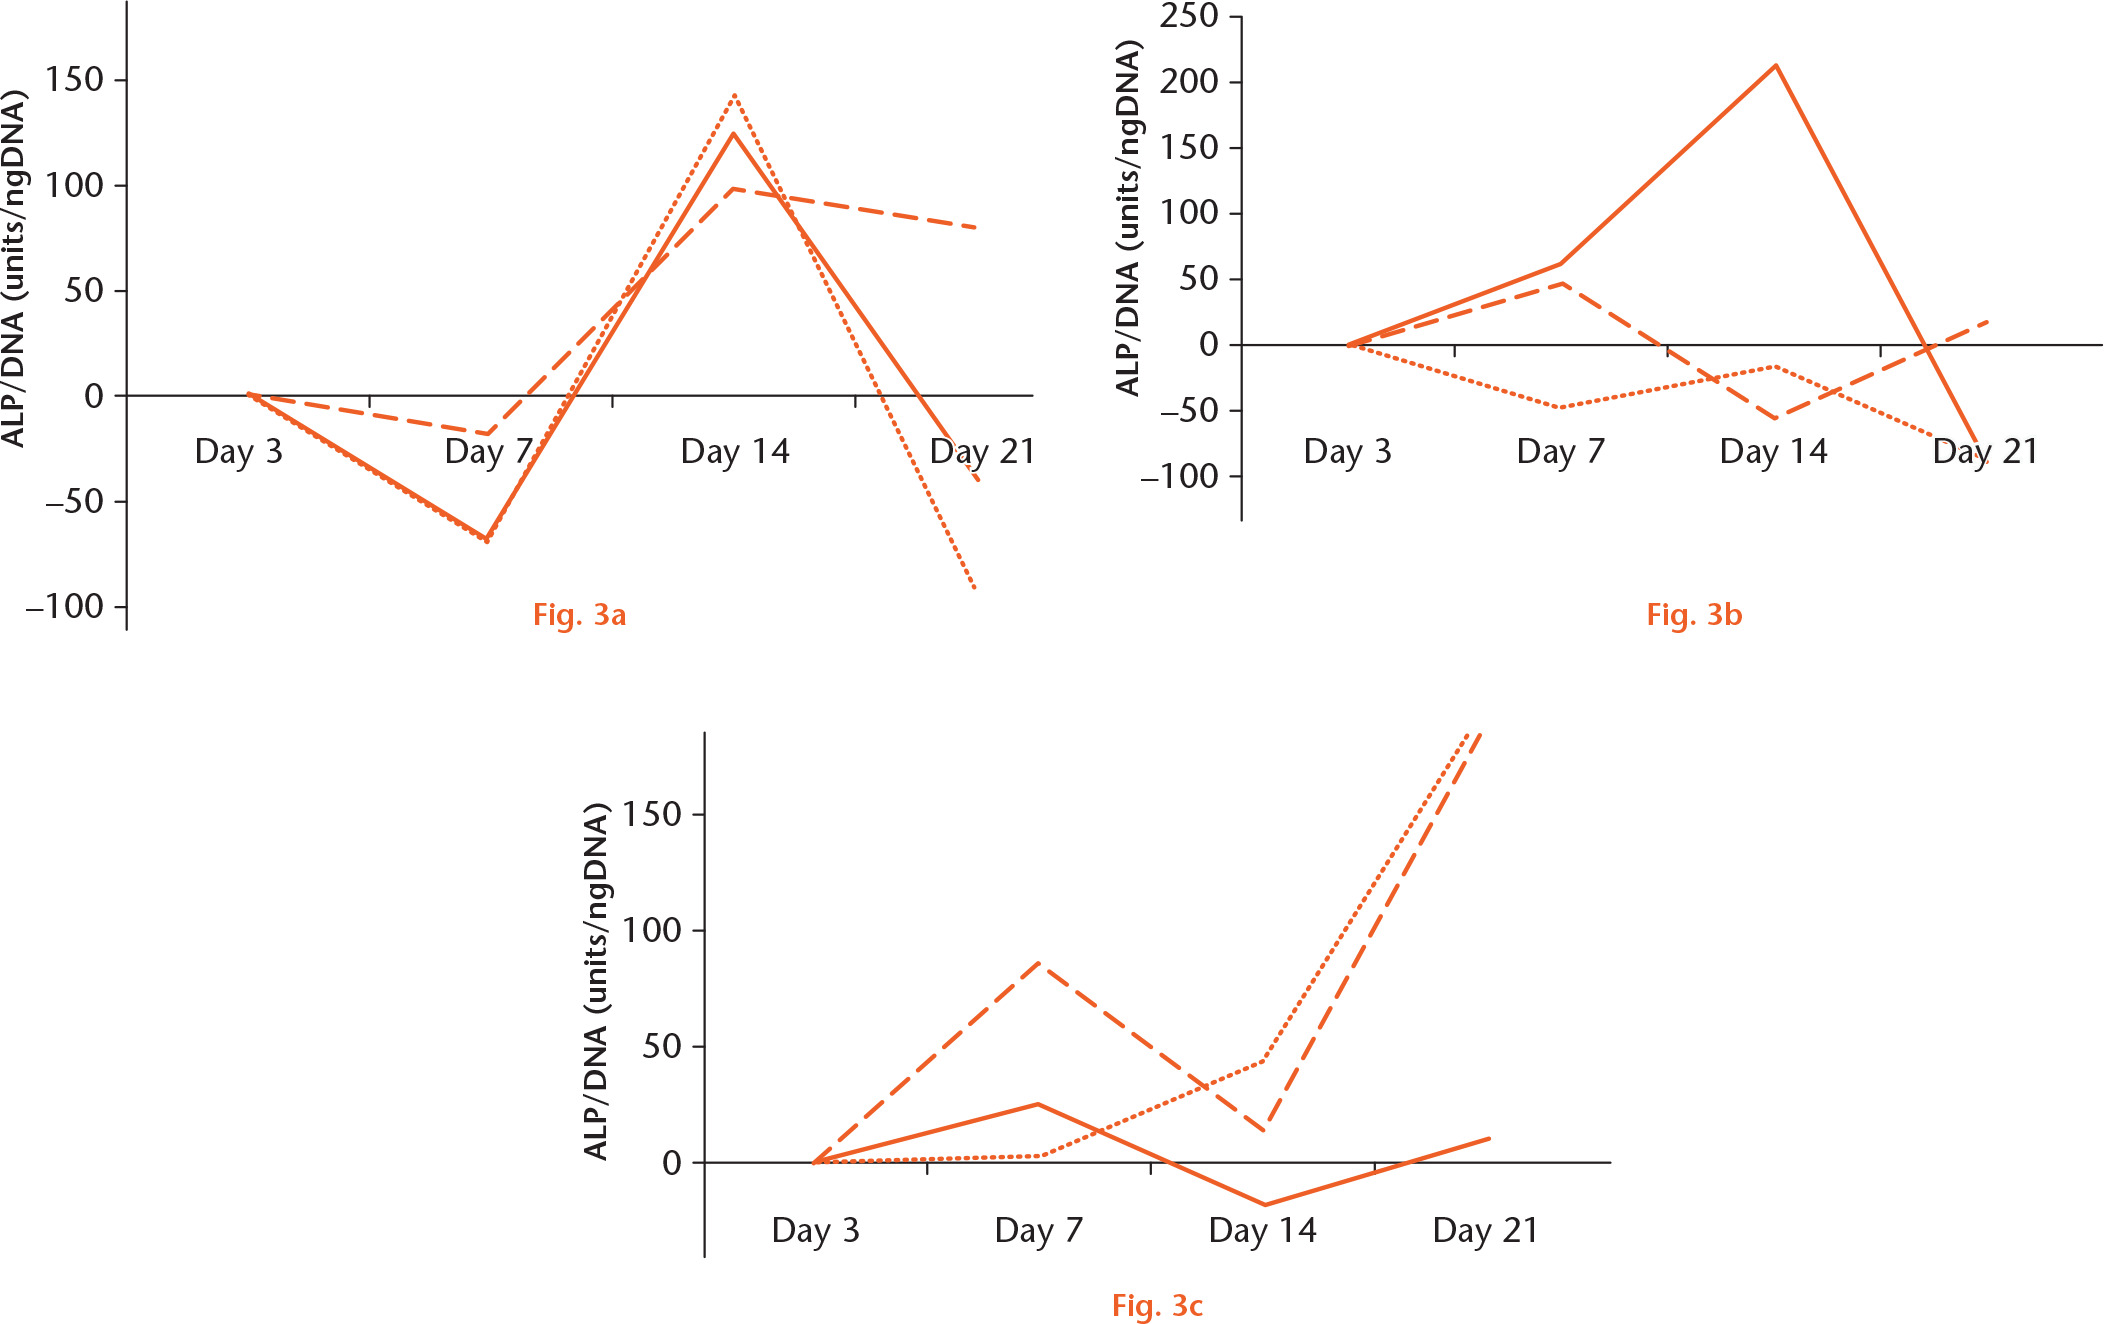  
            Graphs showing the percentage change in alkaline phosphatase (ALP)/DNA for a) young, b) adult, and c) ovariectomized (OVX) mesenchymal stem cells (MSCs) differentiated to osteoblasts at days three, seven, 14, and 21. Each line represents the results from a single culture. There were three replicates from each group of MSCs isolated from young, adult, and OVX rats.
          